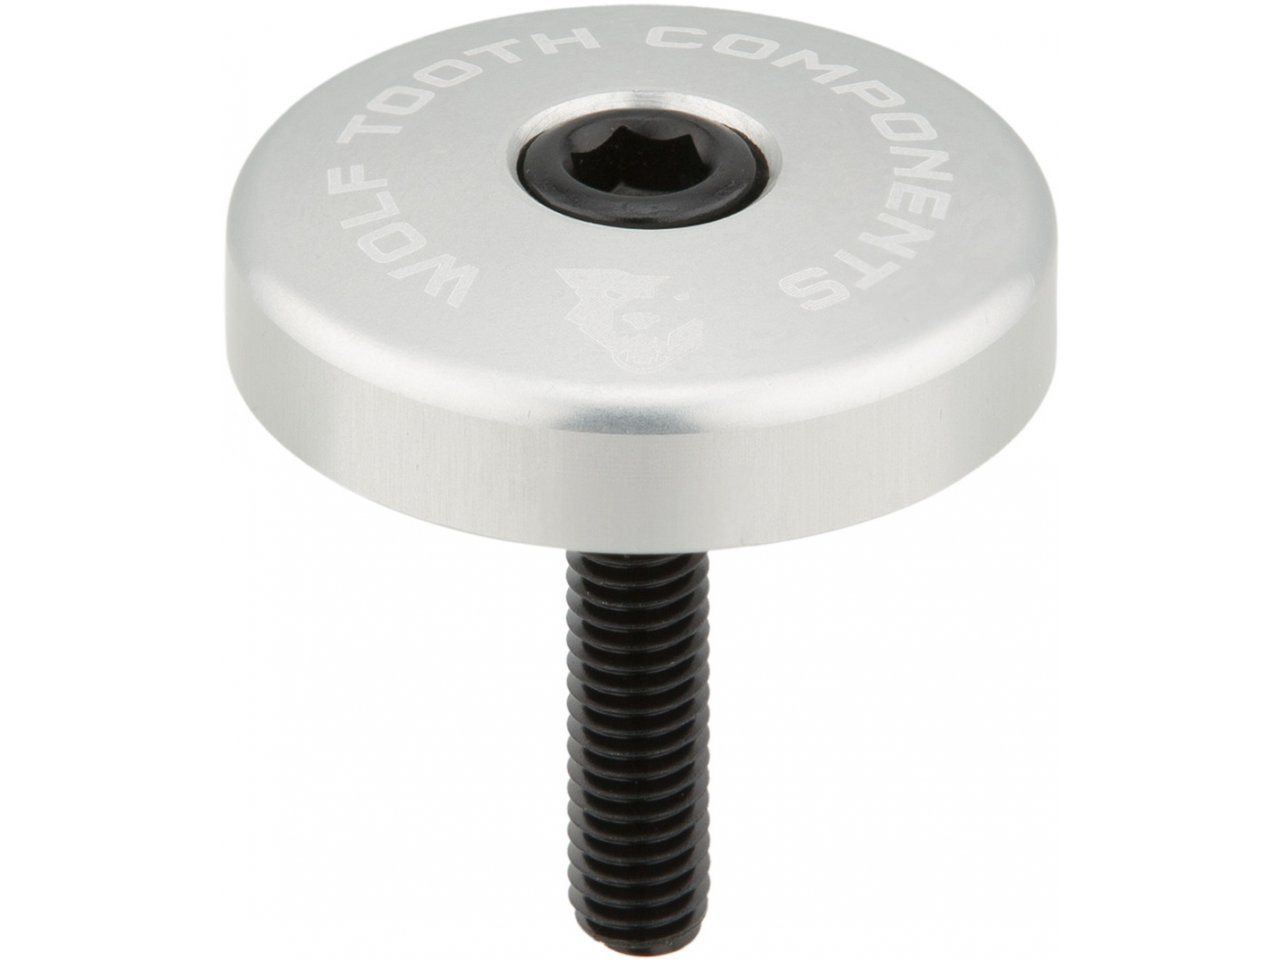 Wolf-Tooth-Components-Ultralight-Stem-Cap-Ahead-Kappe-mit-integriertem-Spacer-silver-5-mm-769...jpeg